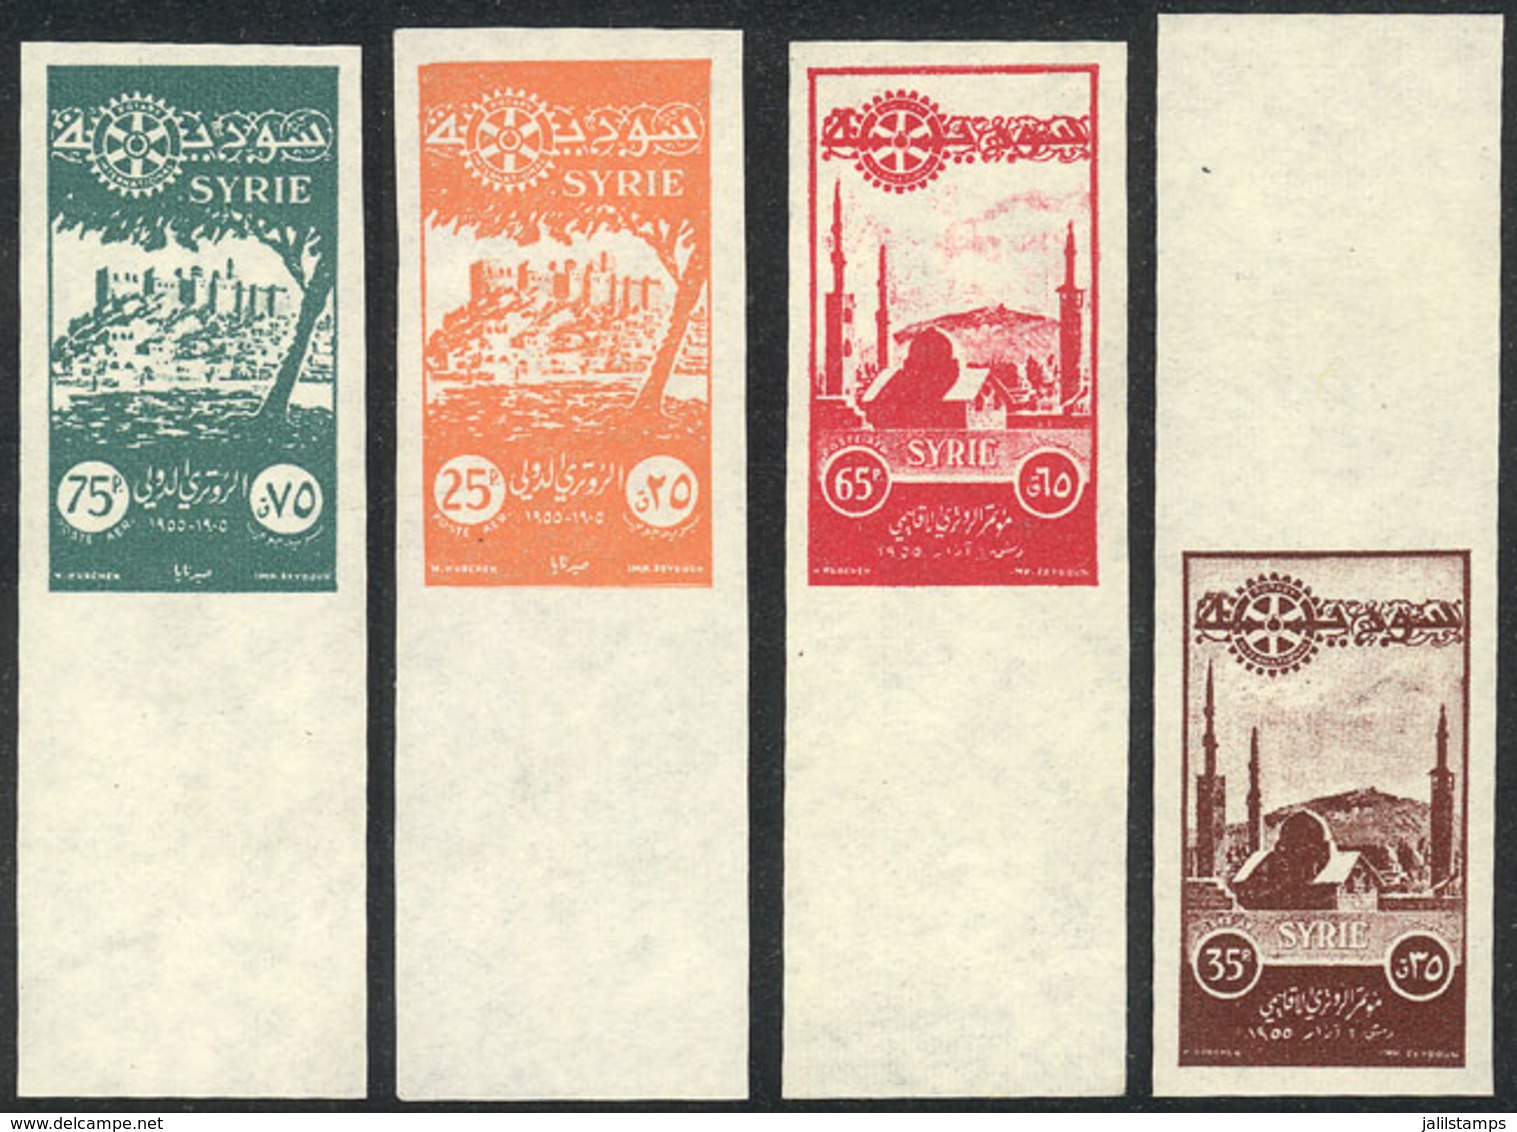 SYRIA: Sc.C187/190, 1955 Rotary International, 4 IMPERFORATE Values In Different Colors From The Original, PROOFS, Excel - Syria